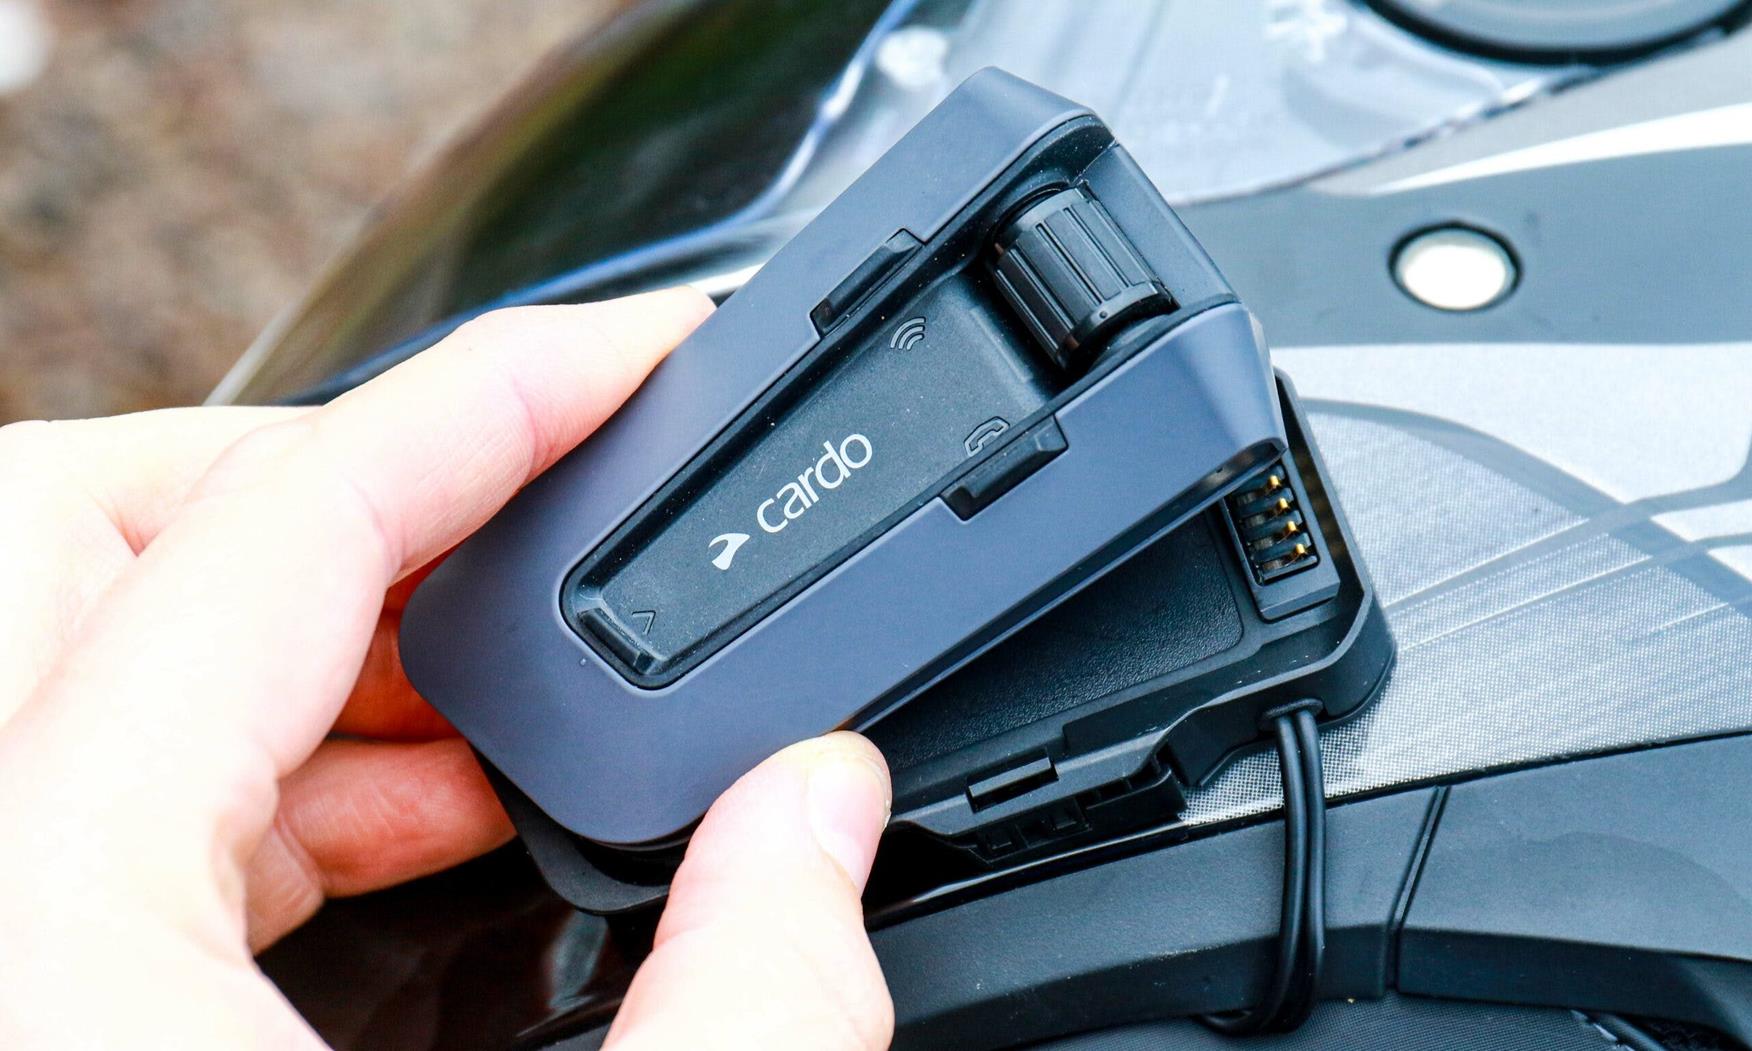 CARDO SYSTEMS PACKTALK EDGE COMMUNICATORS: PRODUCT REVIEW